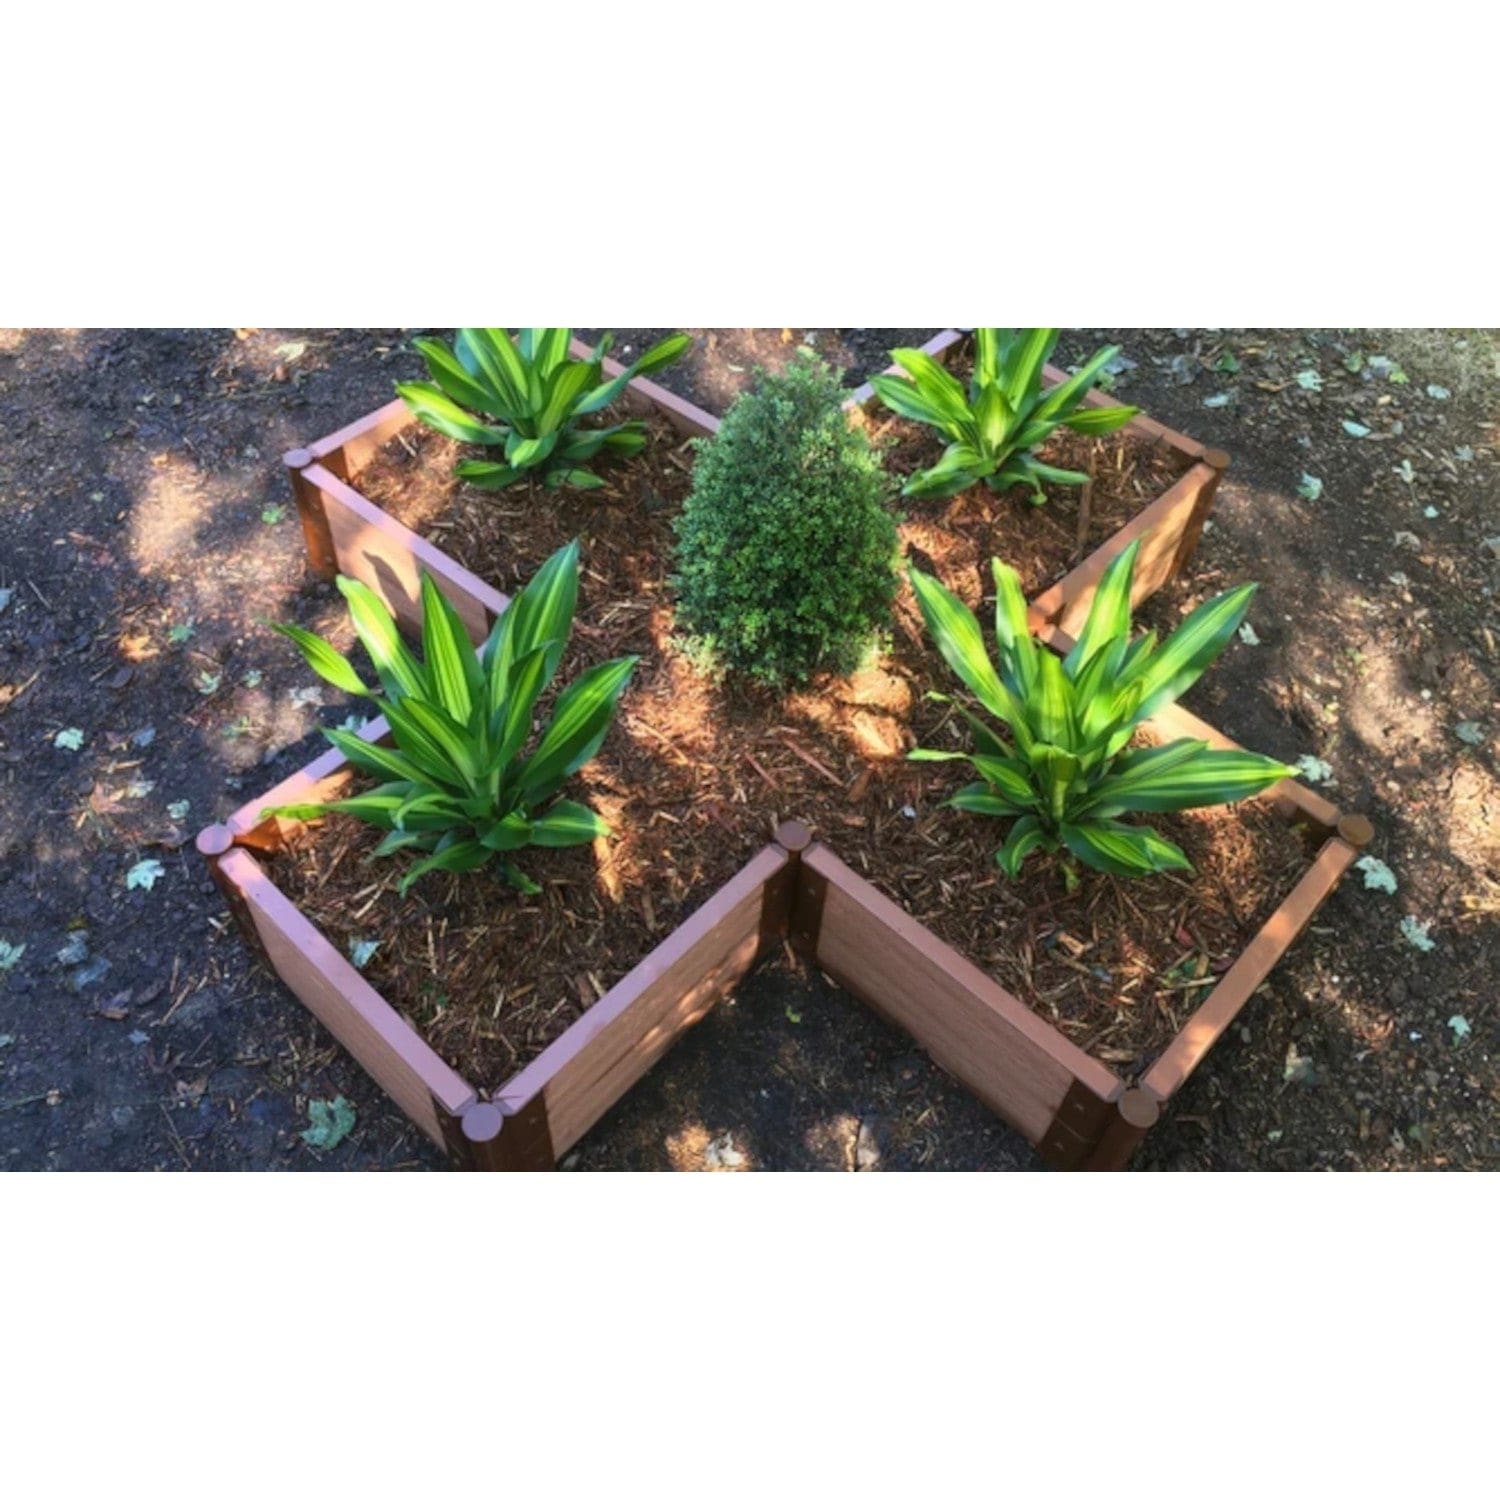 Frame It All Gardening Accessories Frame It All | Tool-Free Military Medallion Raised Garden Bed (Kit Cross) 6' X 6' X 11" - Classic Sienna - 1" Profile 200002484